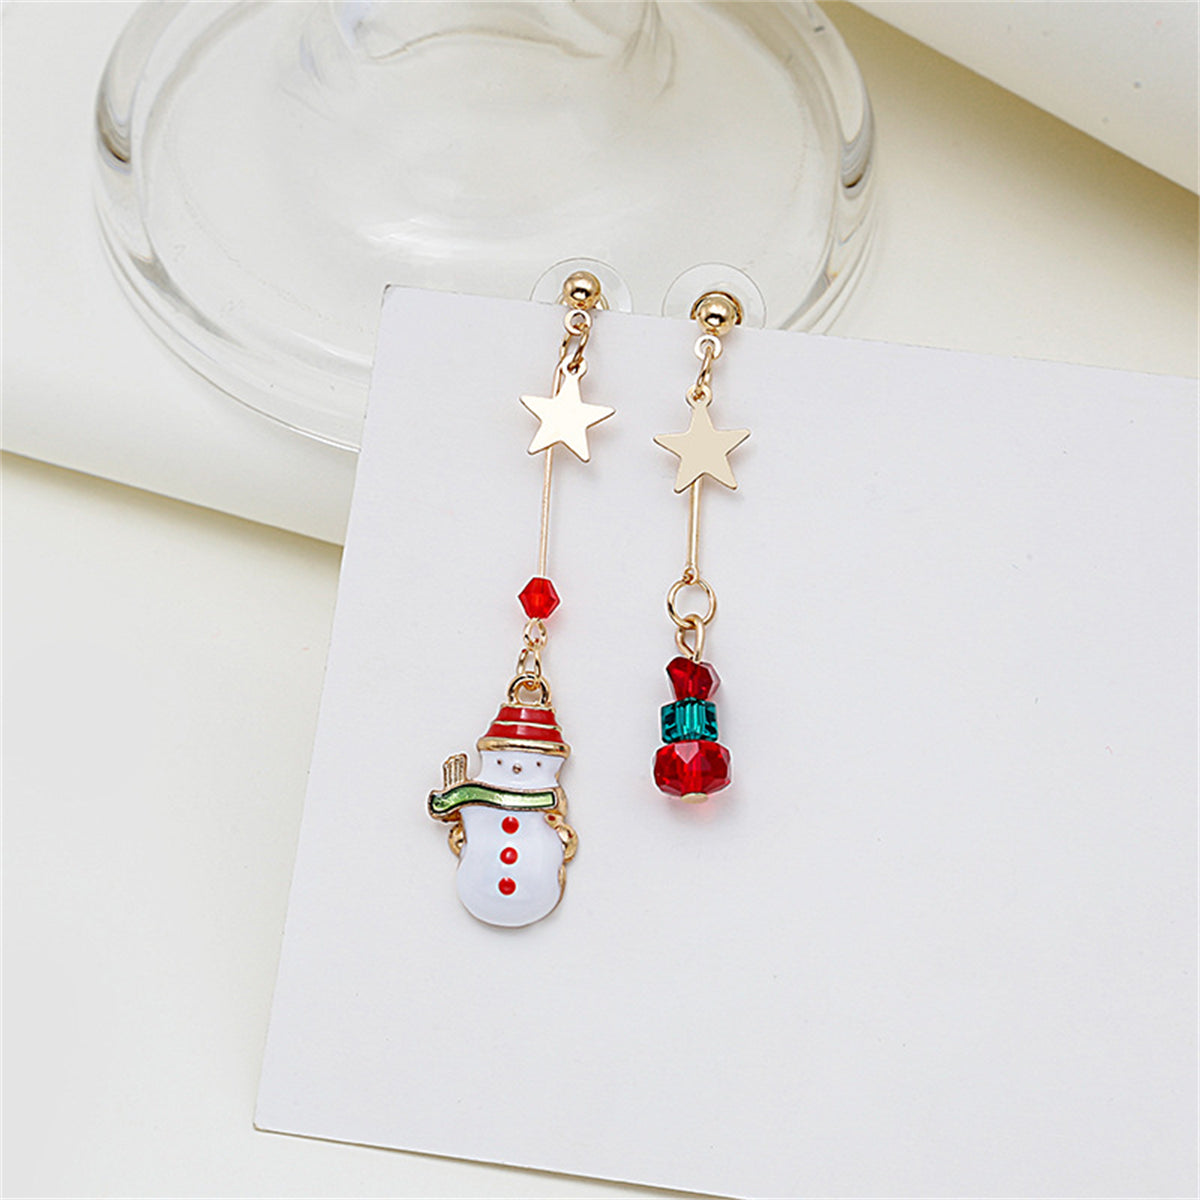 Red Enamel & 18K Gold-Plated Star & Snowman Mismatched Drop Earrings